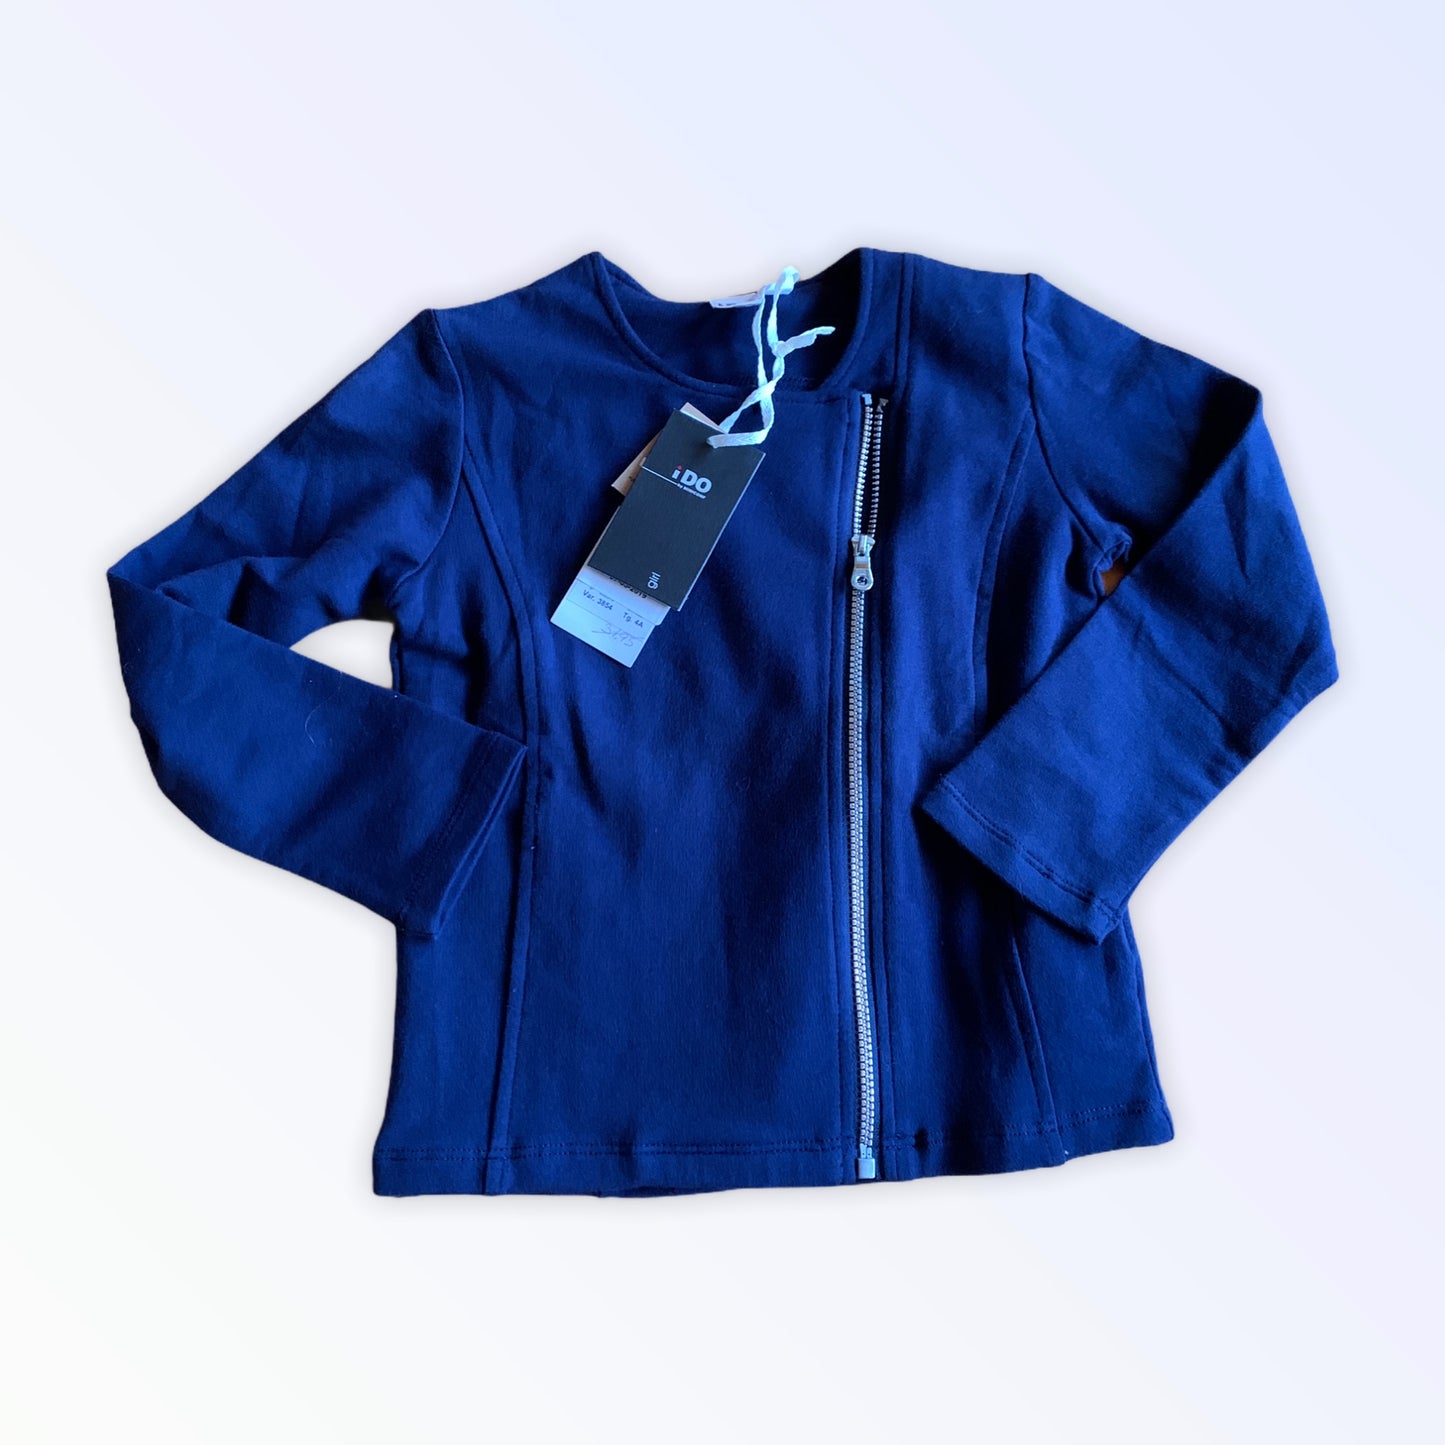 New Ido blue sweater for 4 year old girls